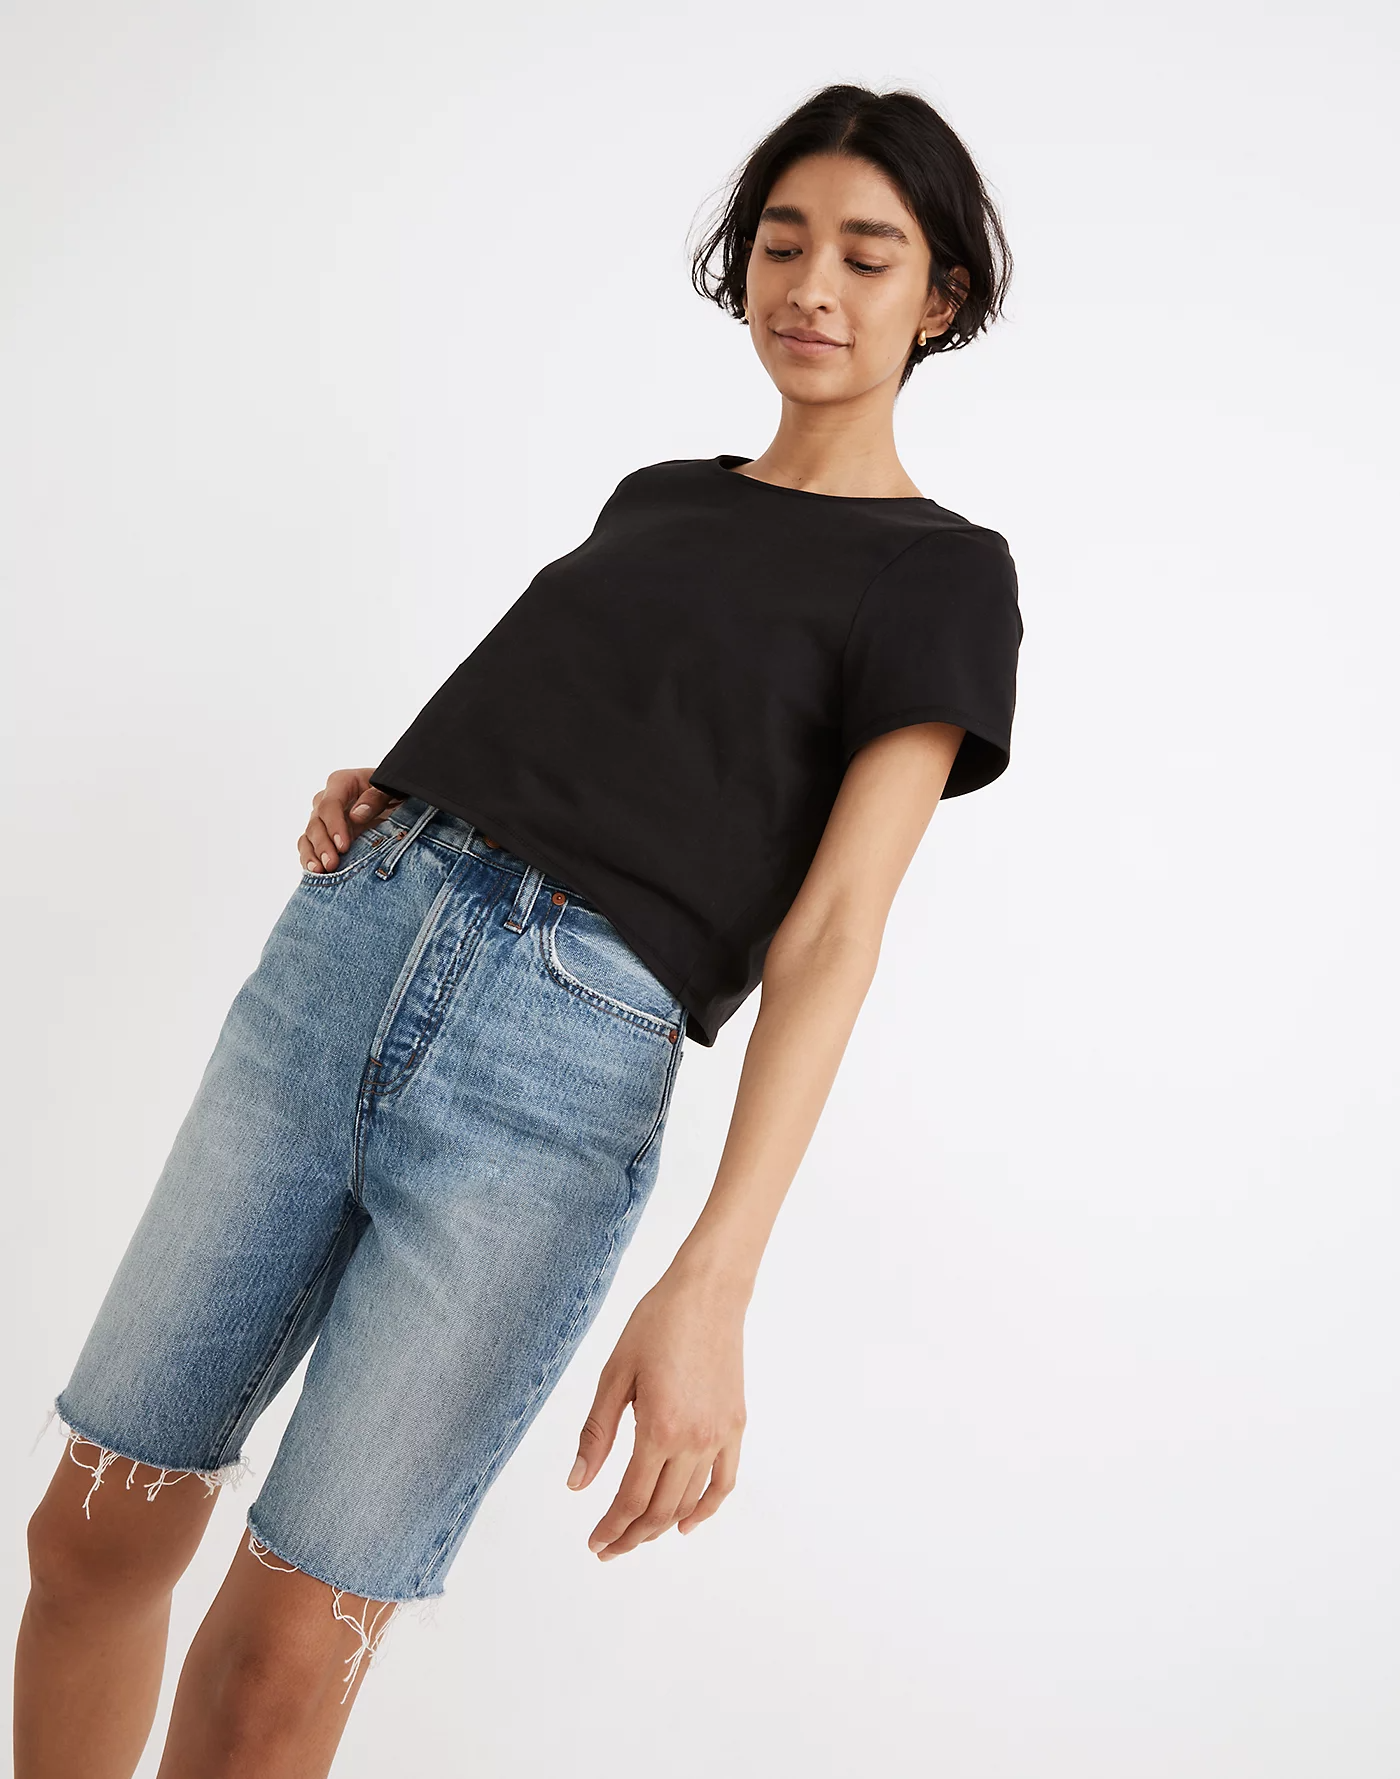 Madewell + HighRise Long Denim Shorts in Brightwater Wash